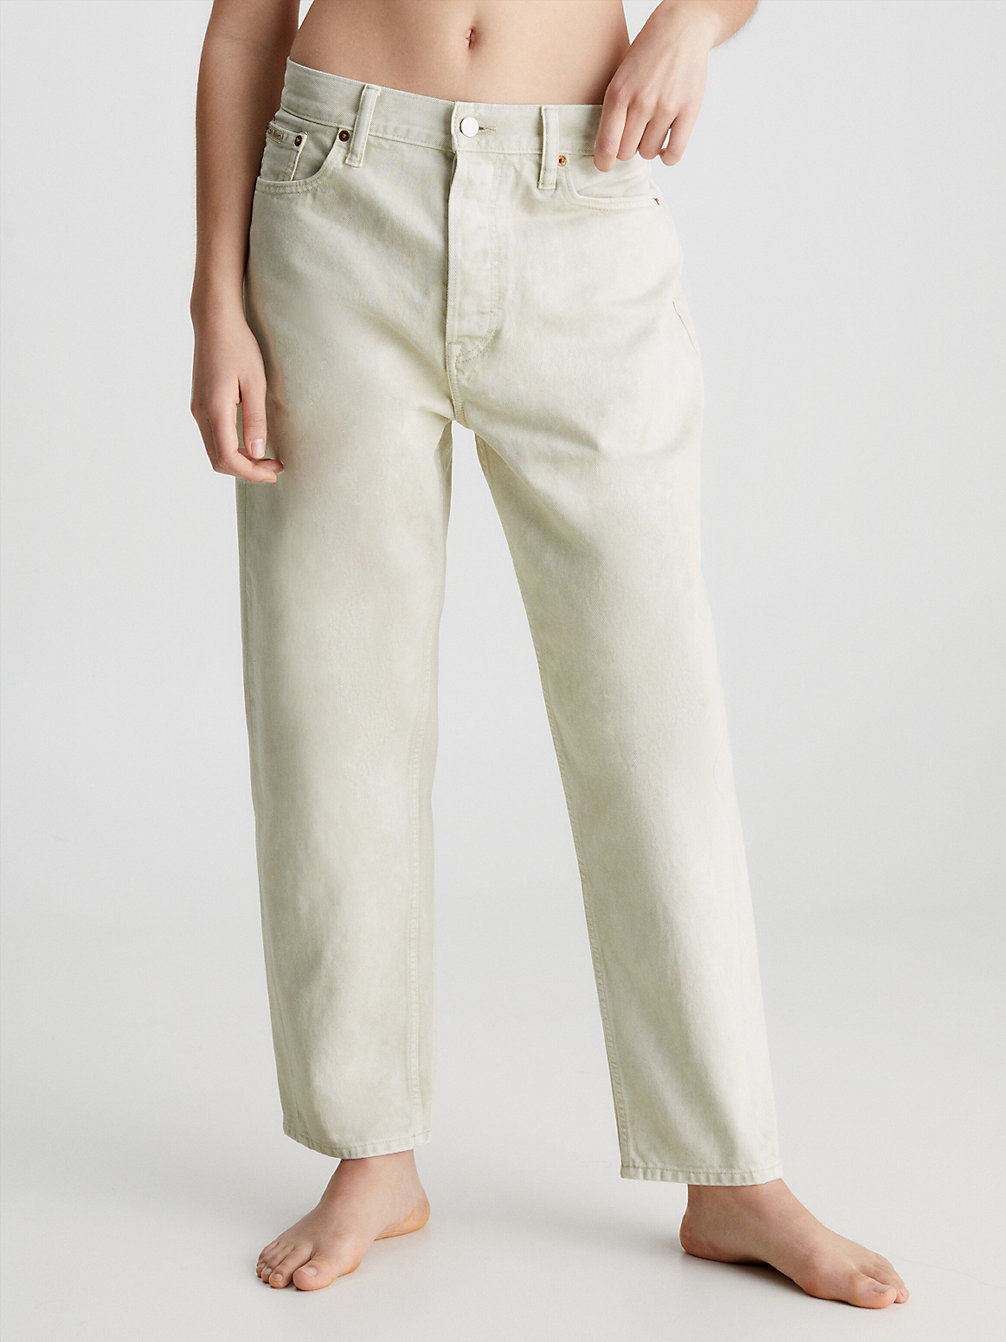 Unisex Relaxed Jeans - CK Standards > MARBLE UNBLEACHED > undefined hombre > Calvin Klein